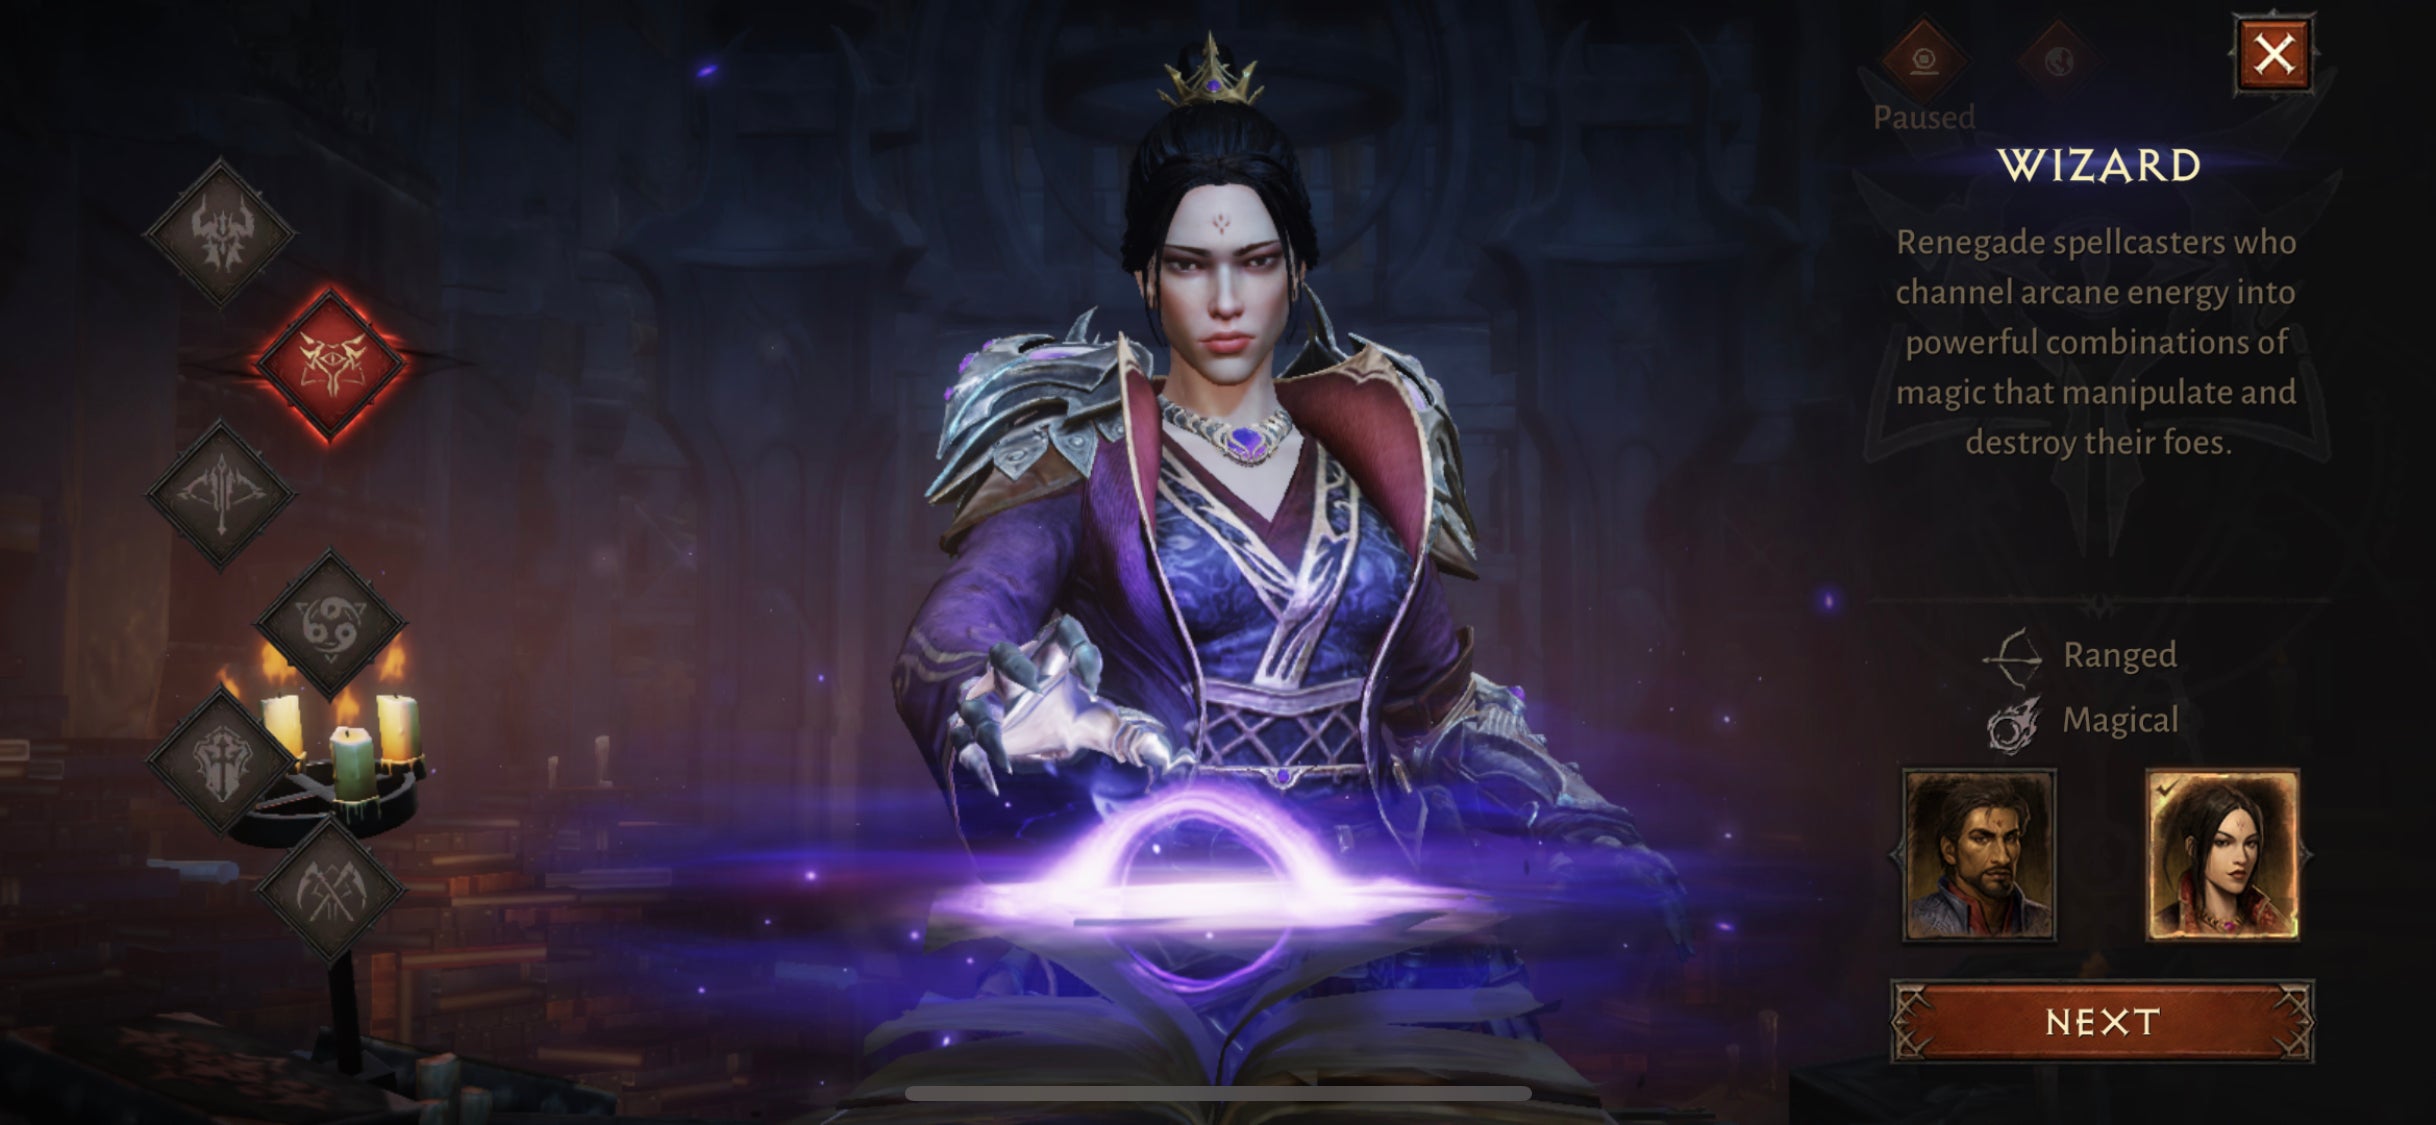 The Wizard class from Diablo Immortal casts an orb of purple magic in front of them